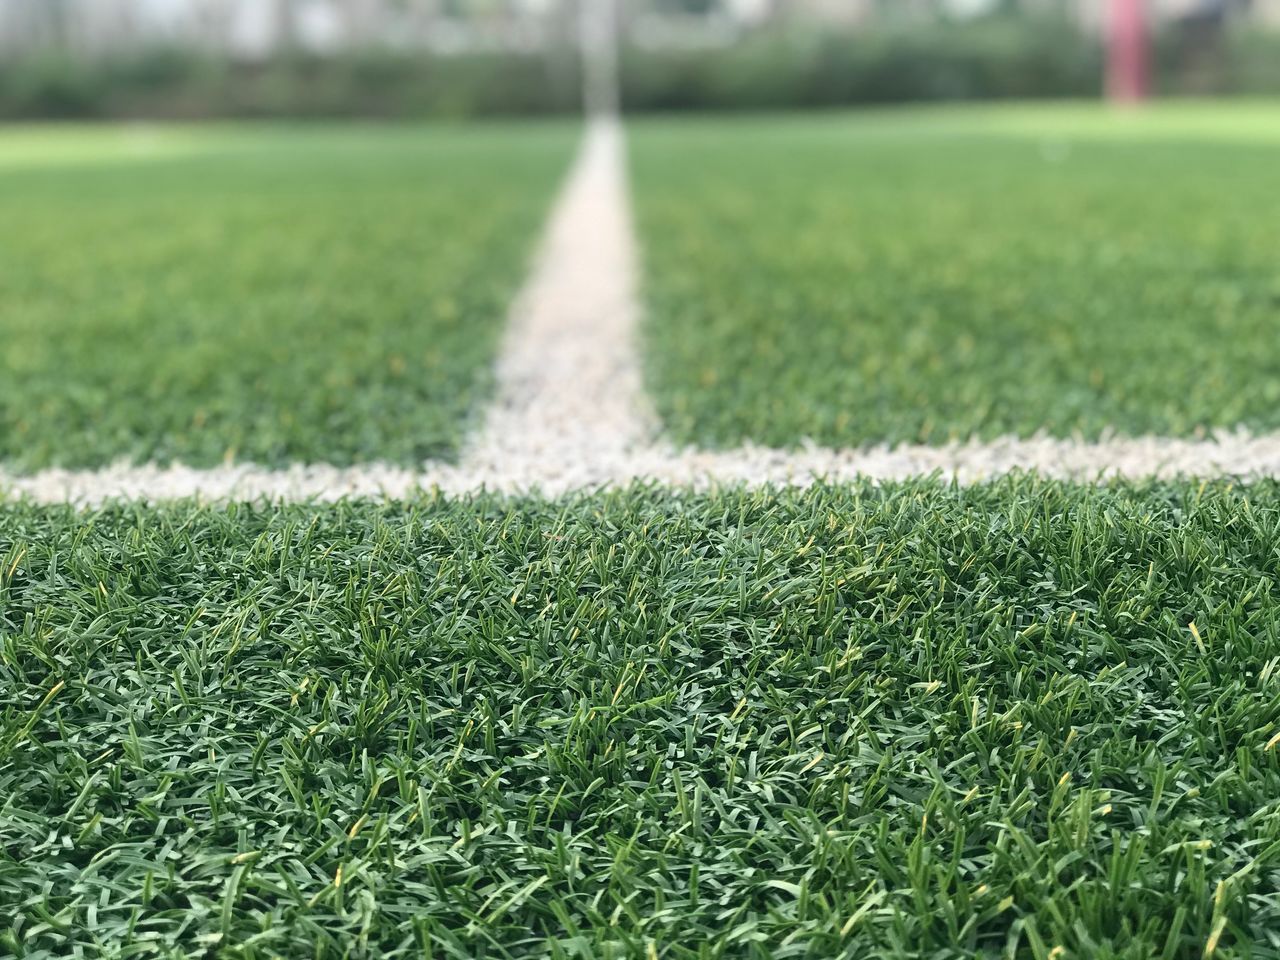 grass, plant, sport, green color, day, playing field, nature, no people, soccer, outdoors, growth, selective focus, land, focus on foreground, field, soccer field, team sport, single line, white color, close-up, surface level, turf, dividing line